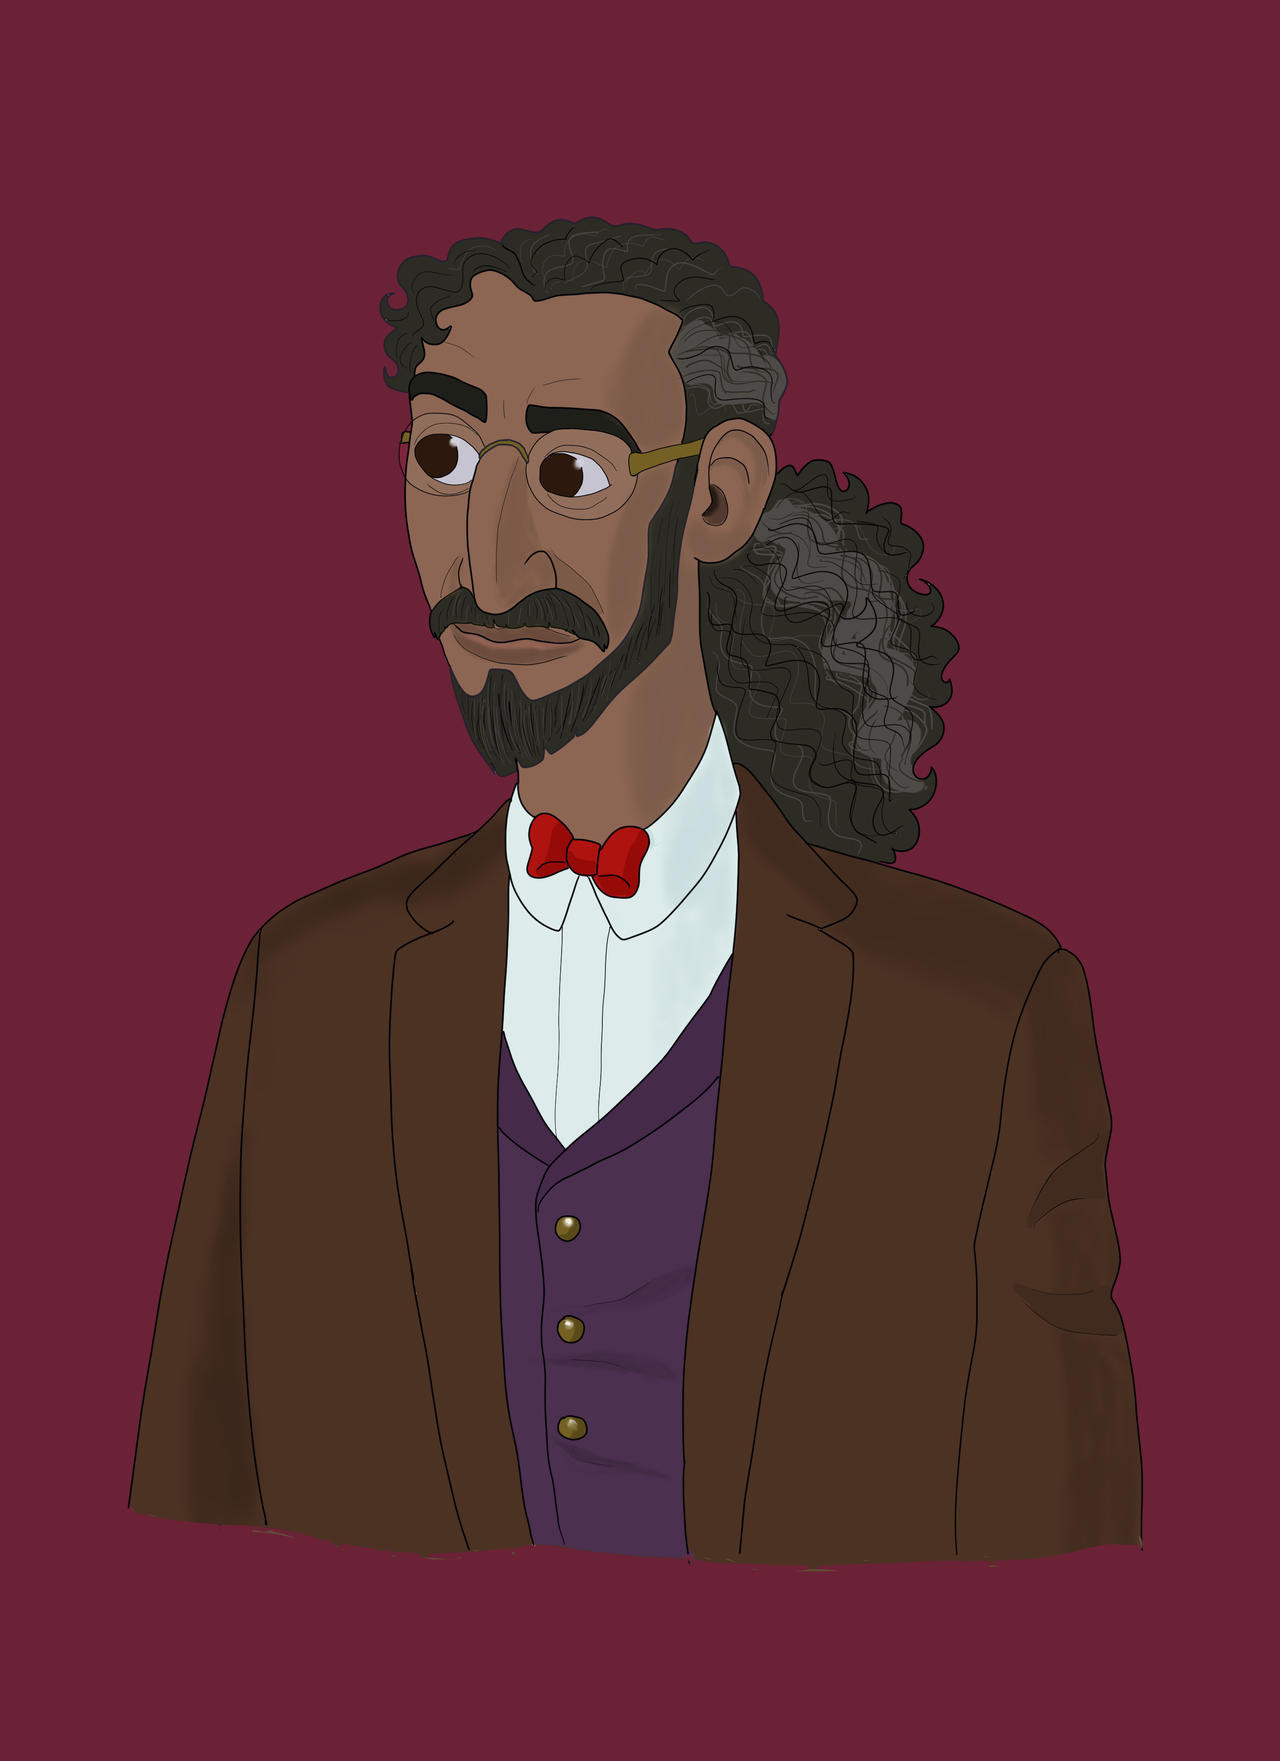 theodore_carter_by_chinesegal_dffv1ux-fullview.jpg